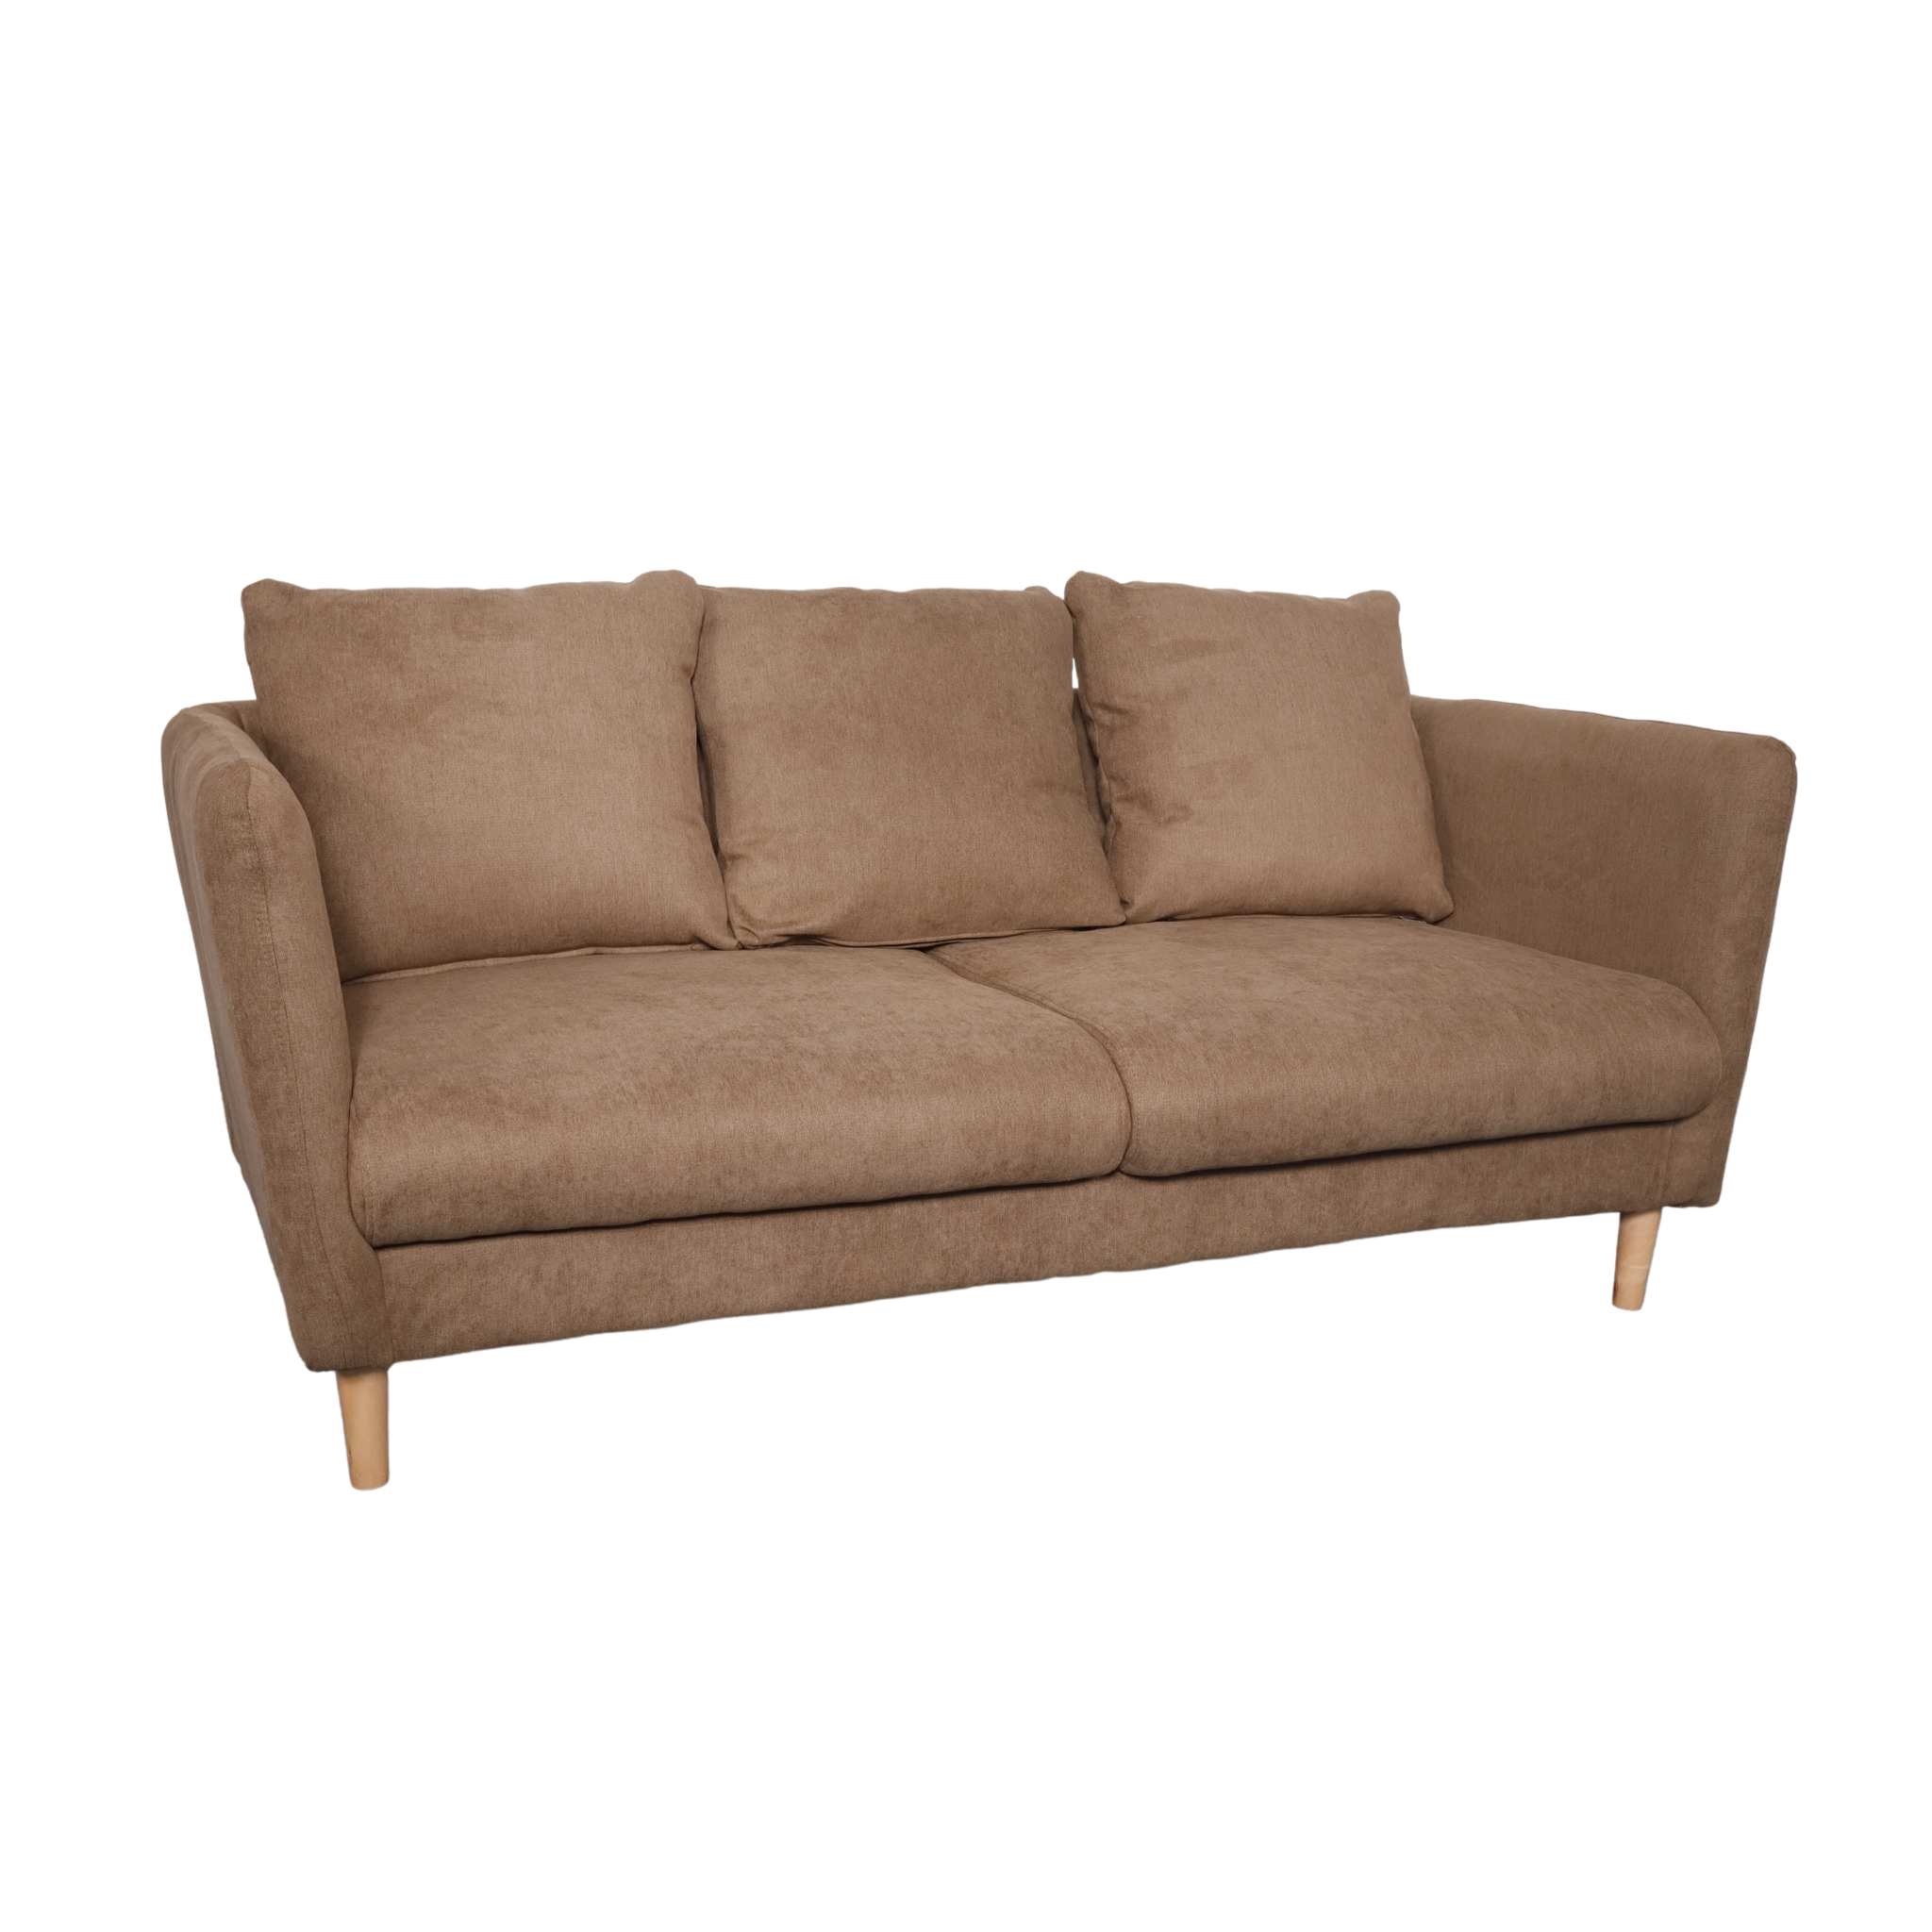 JANE 3 Seater Fabric Sofa AF Home